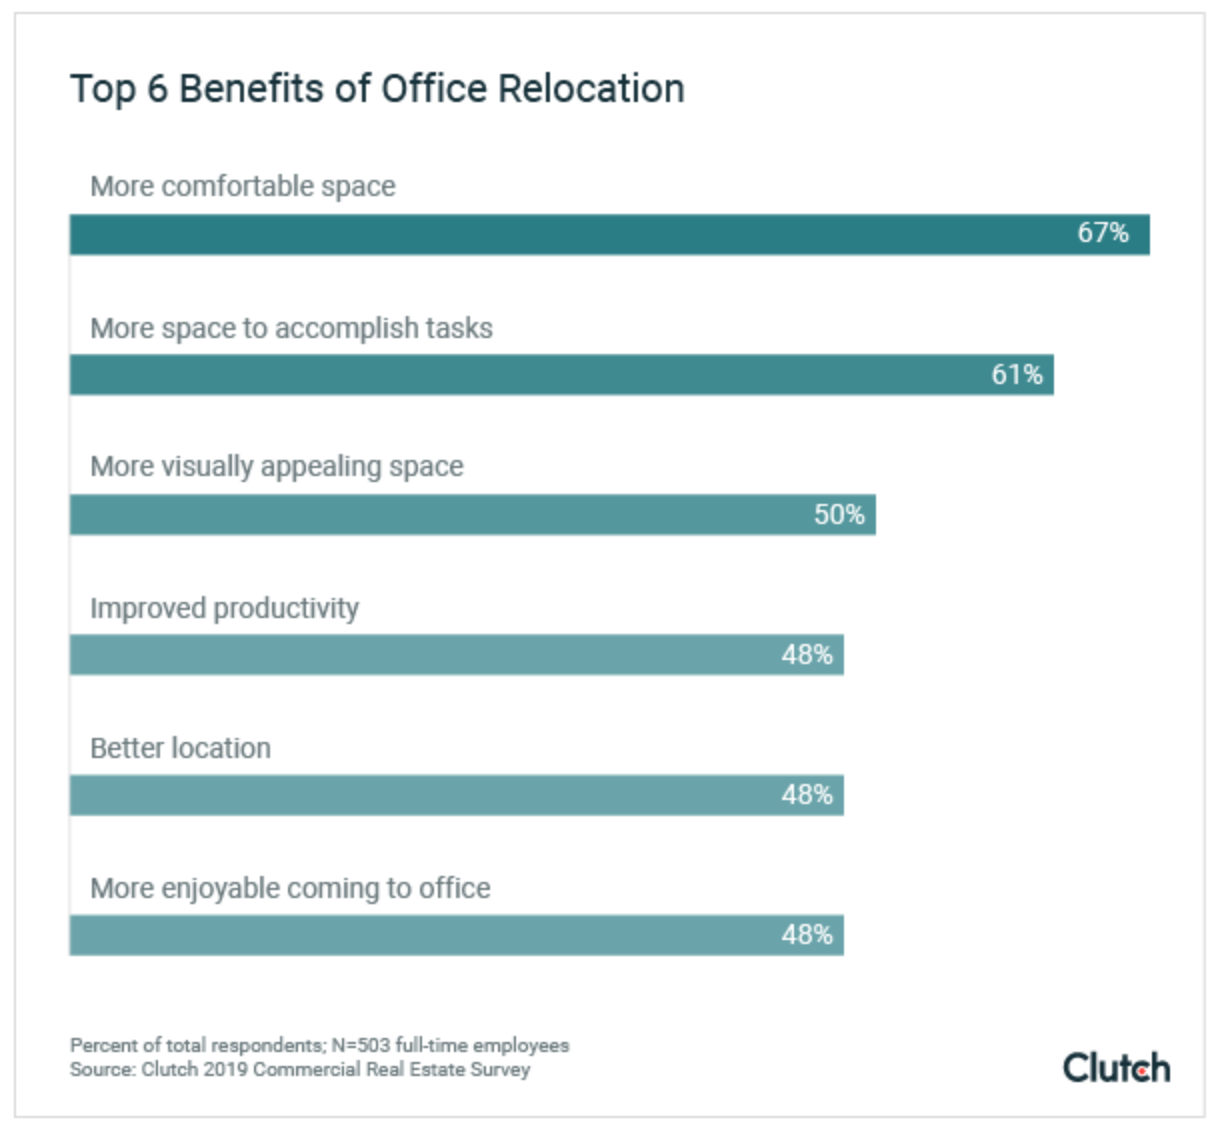 Top 6 benefits of office relocation